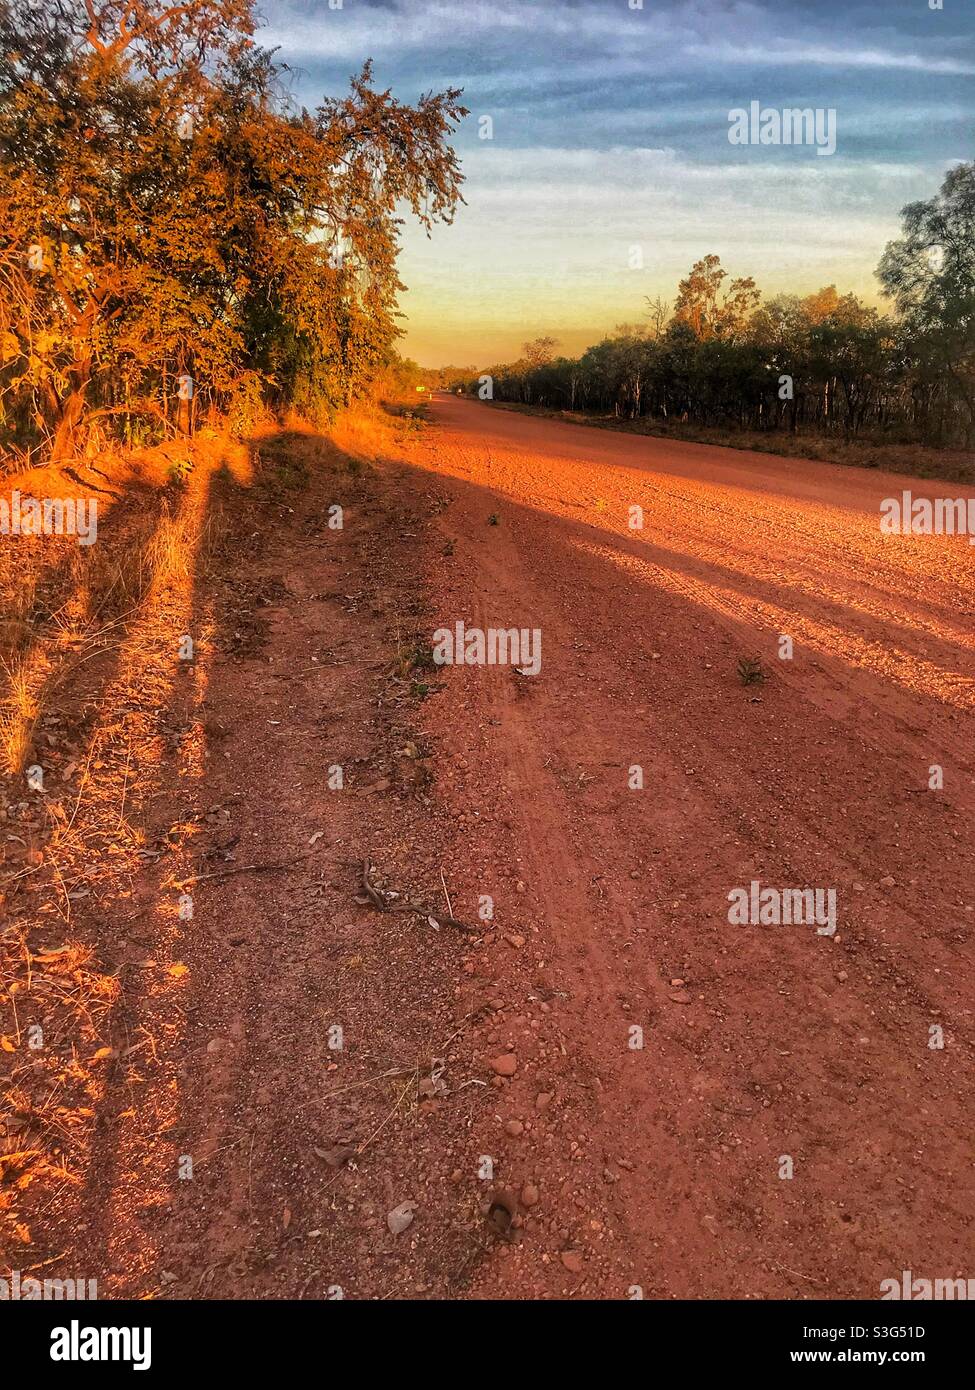 Late afternoon shadows on a red dirt road in Kakadu National Park, Northern Territory, Australia Stock Photo